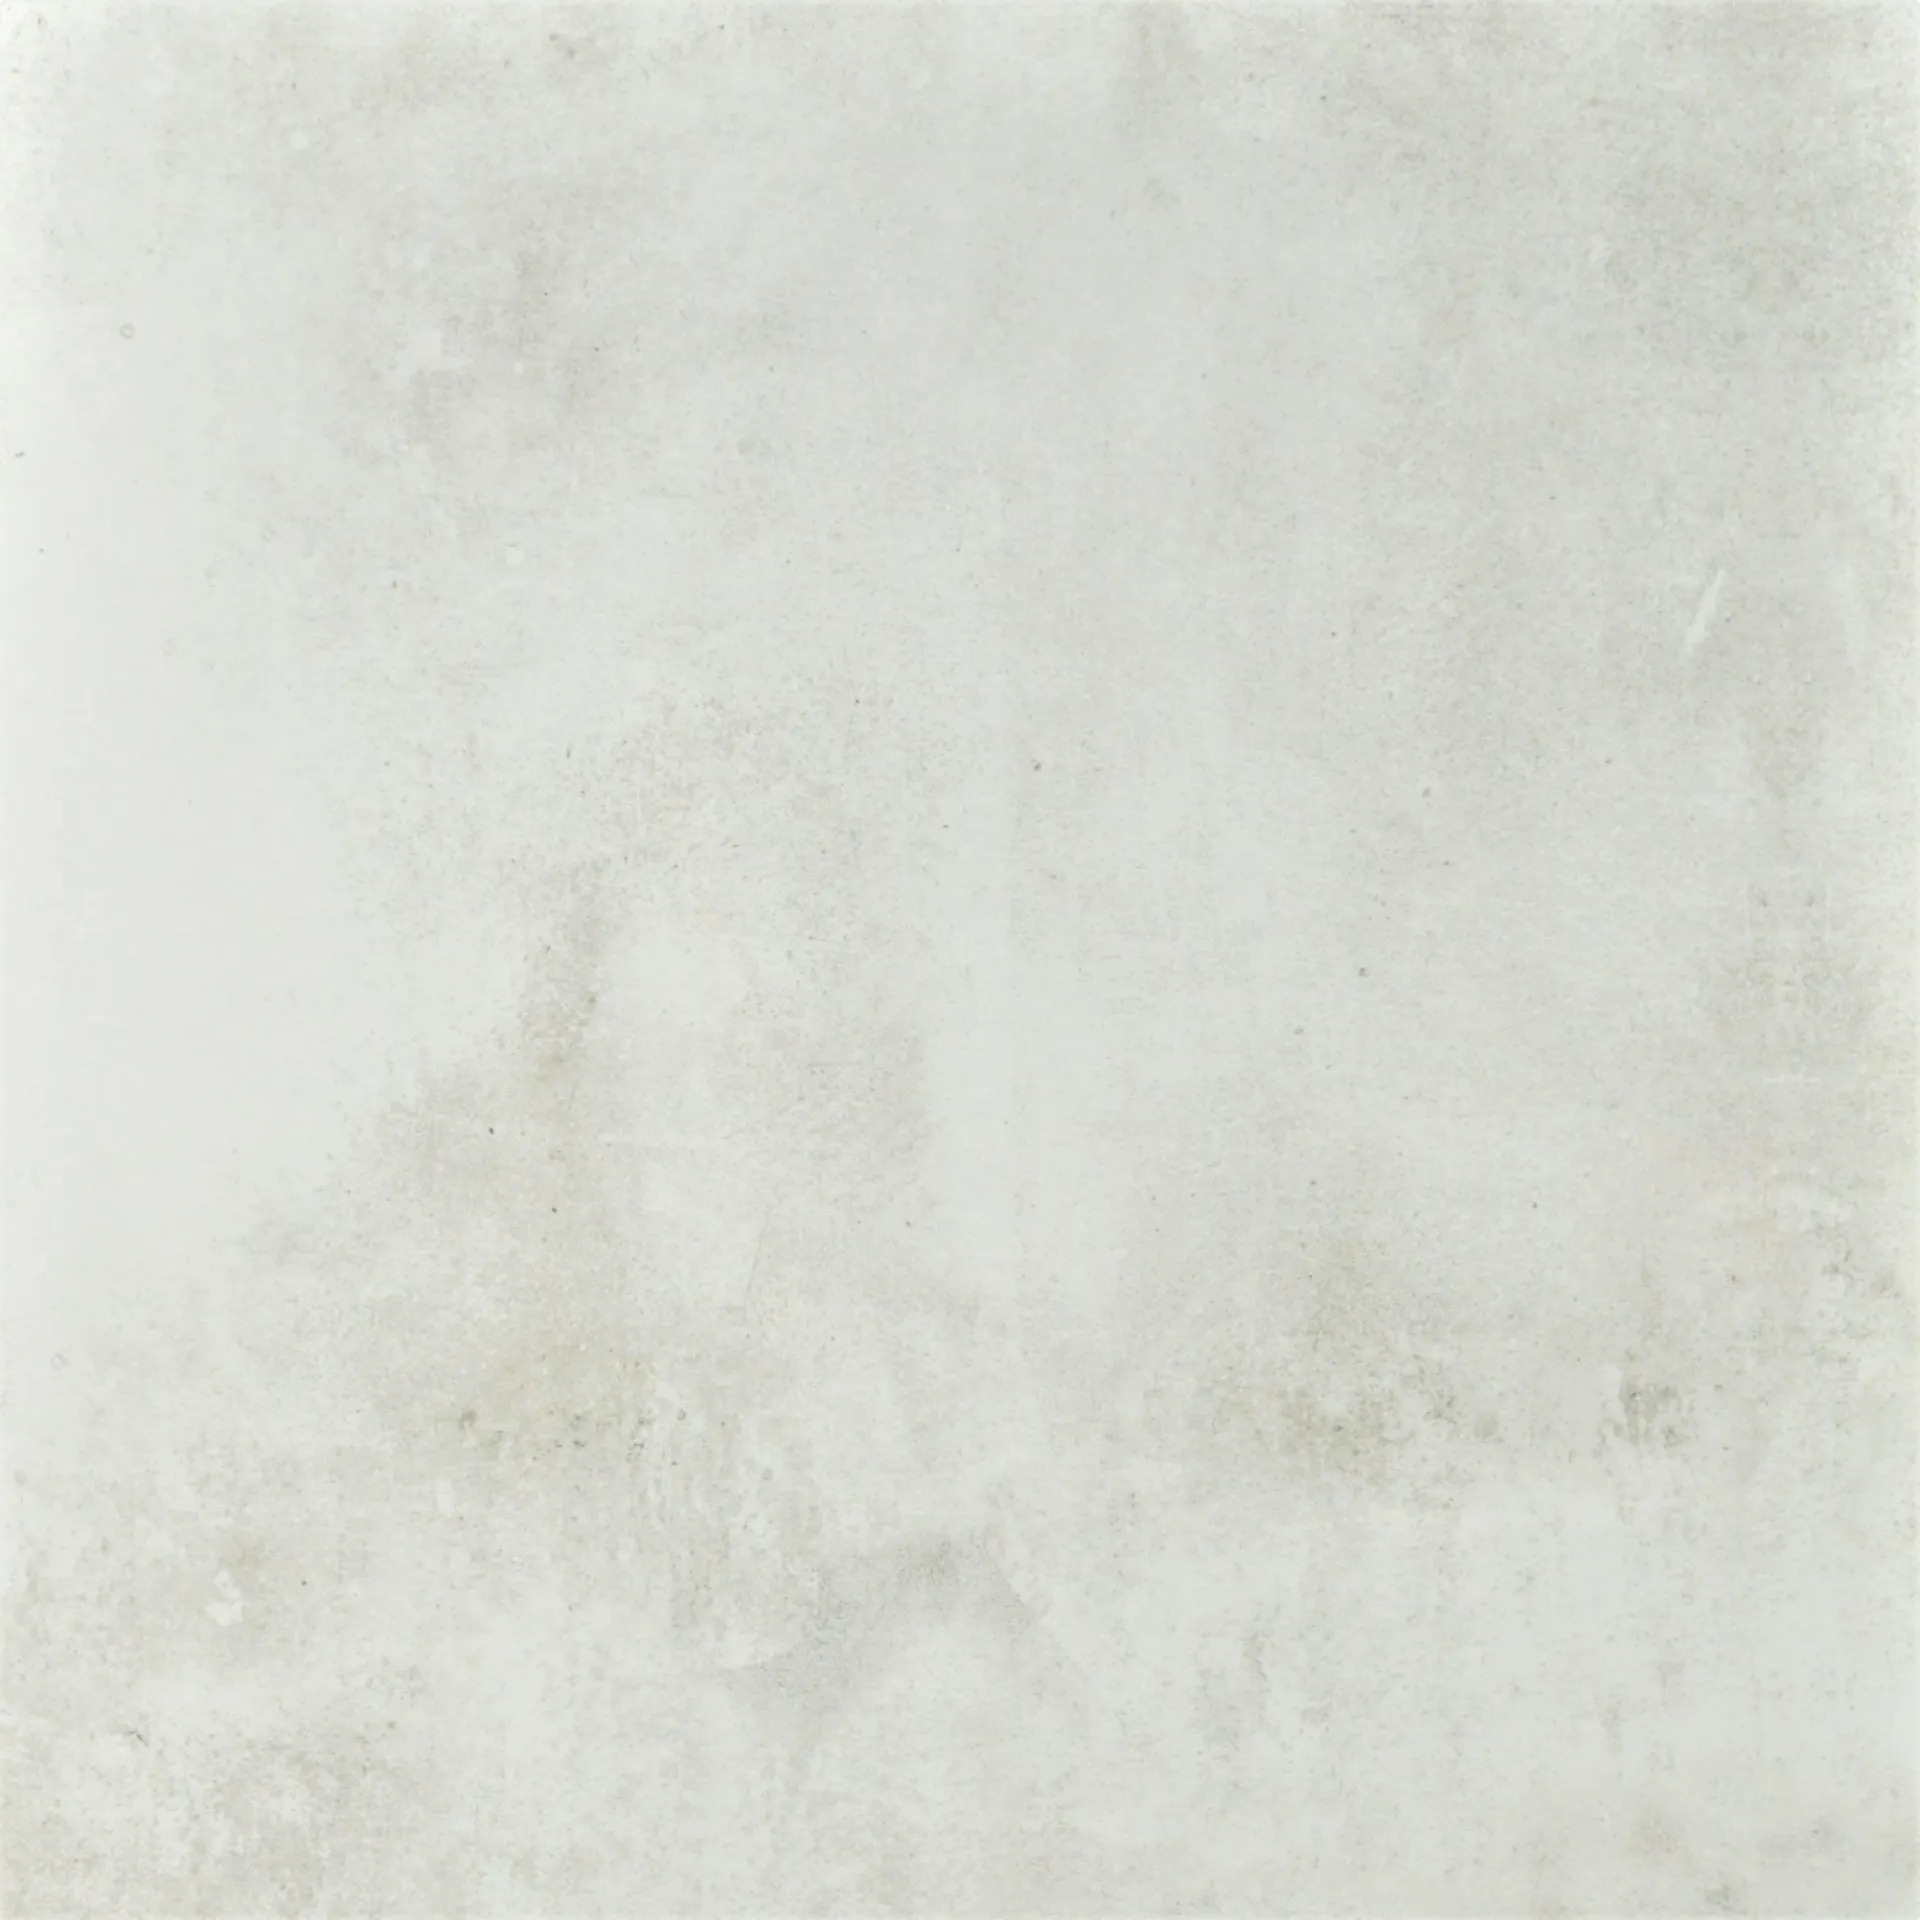 GRES MONTREAL BIANCO GLOSSY RECT 60X60 EUROCERAMIC